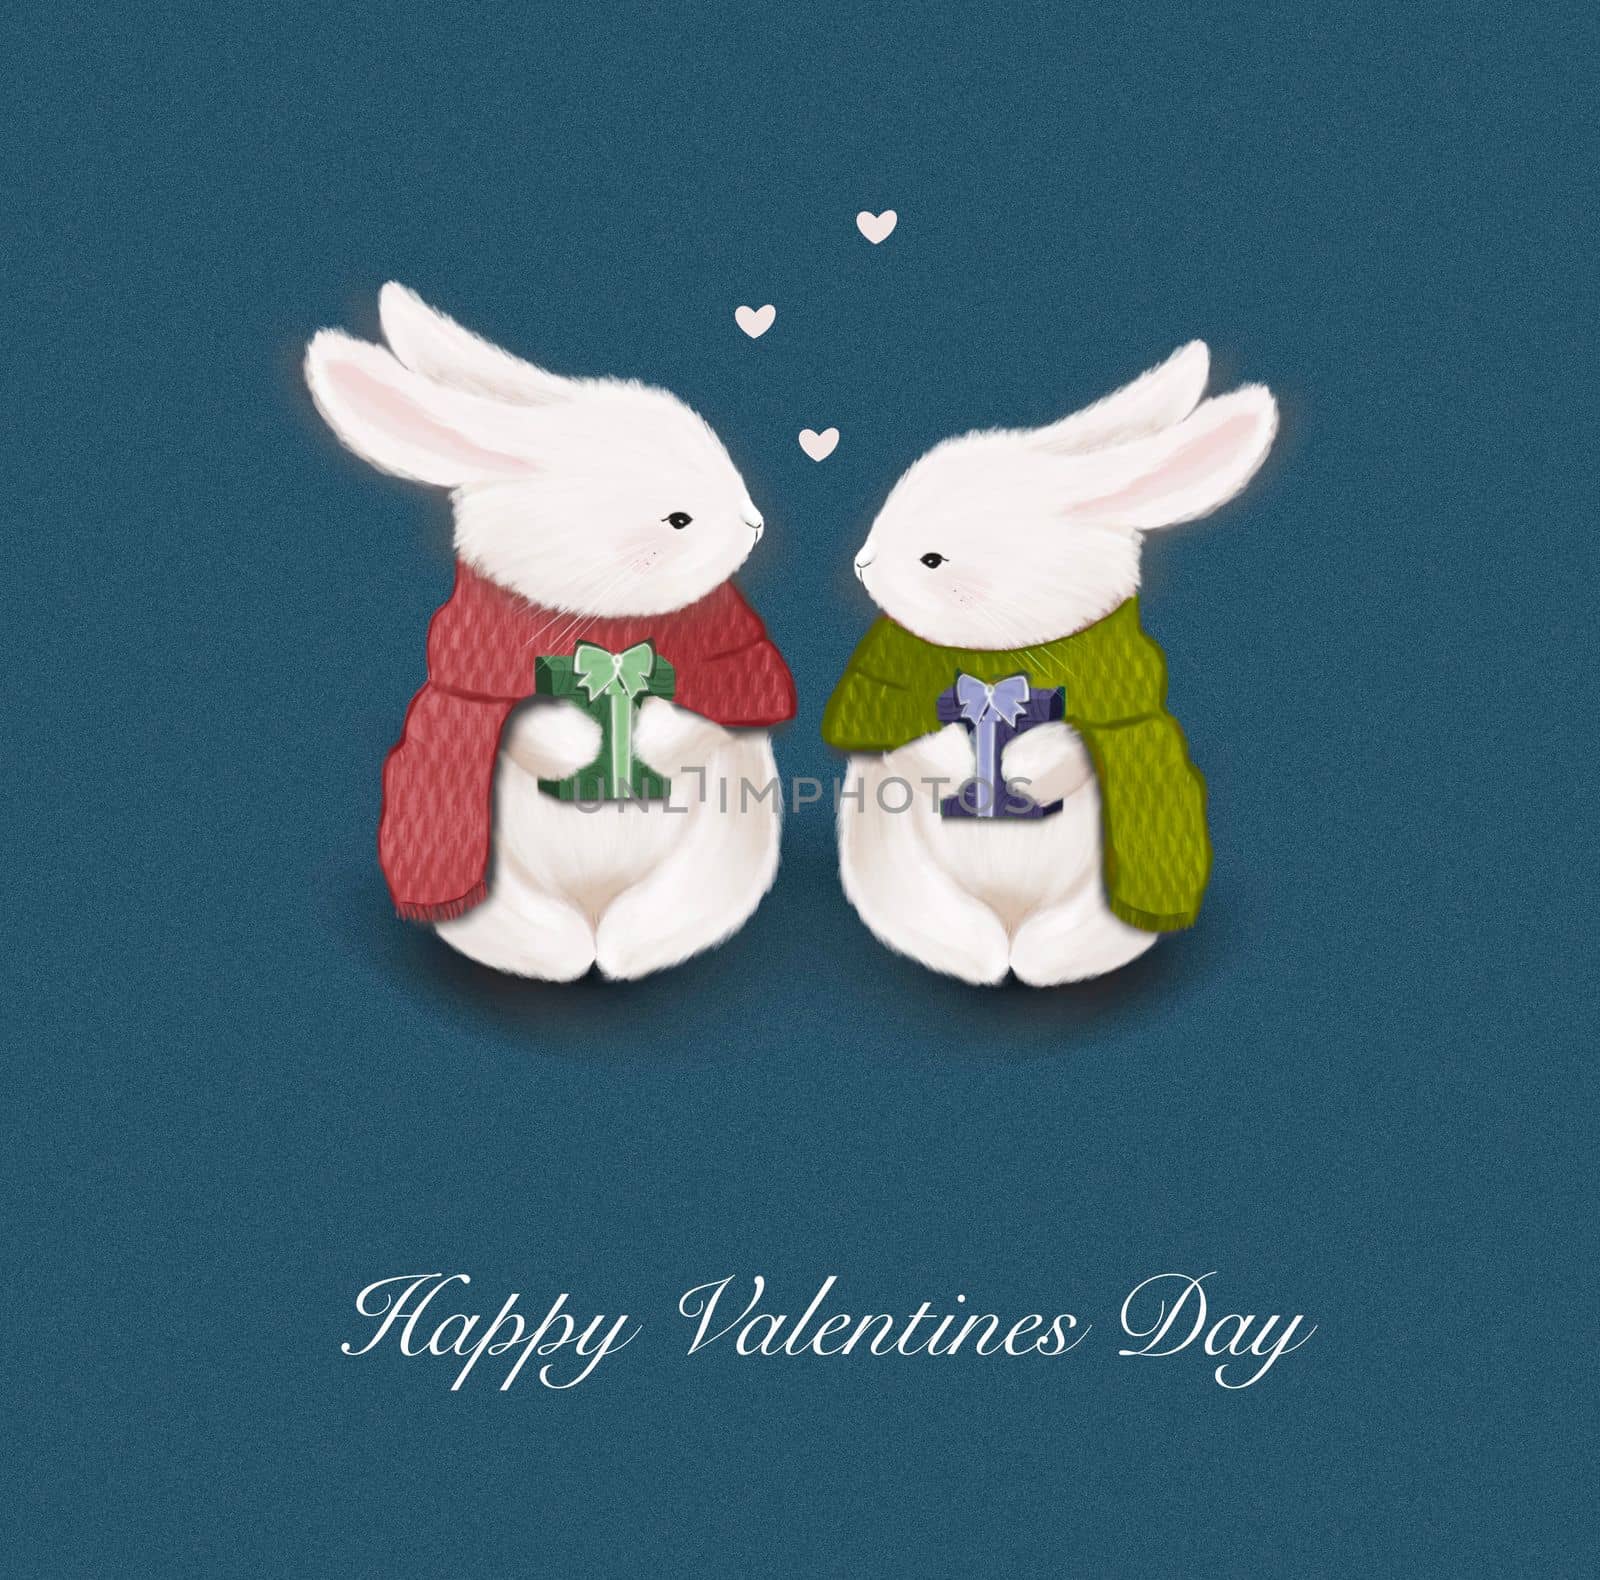 A postcard with cute rabbits for Valentine's Day. by Olga_OLiAN